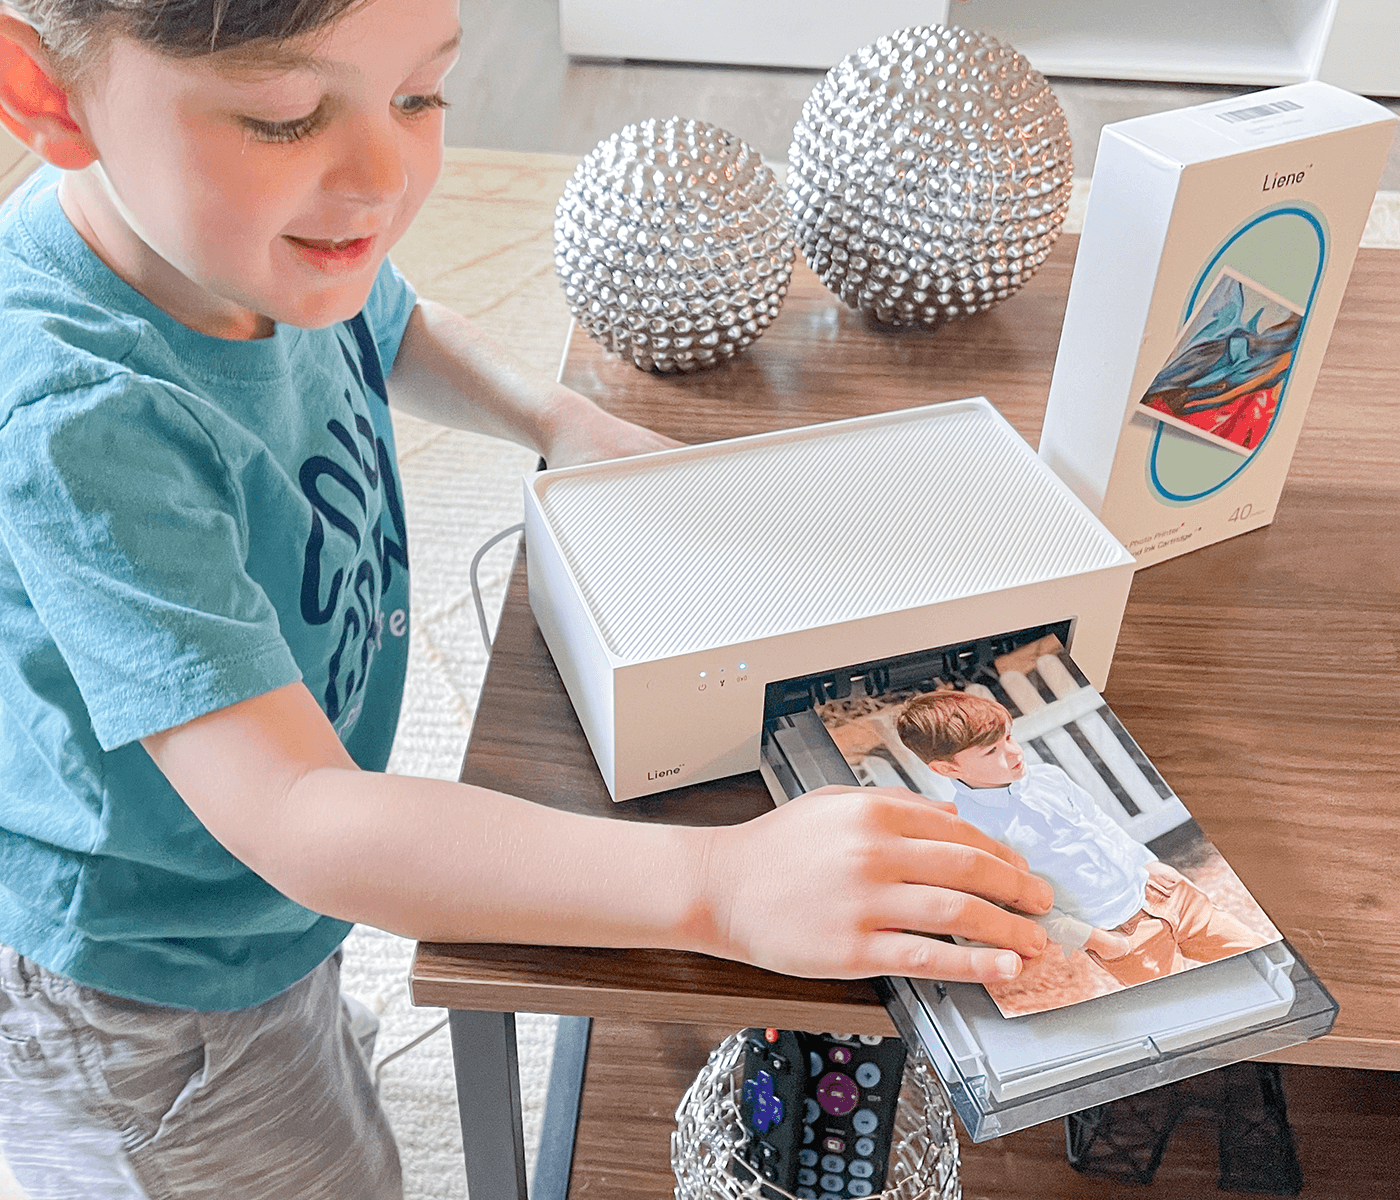 Capturing Memories in an Instant with Liene Instant Photo Printers